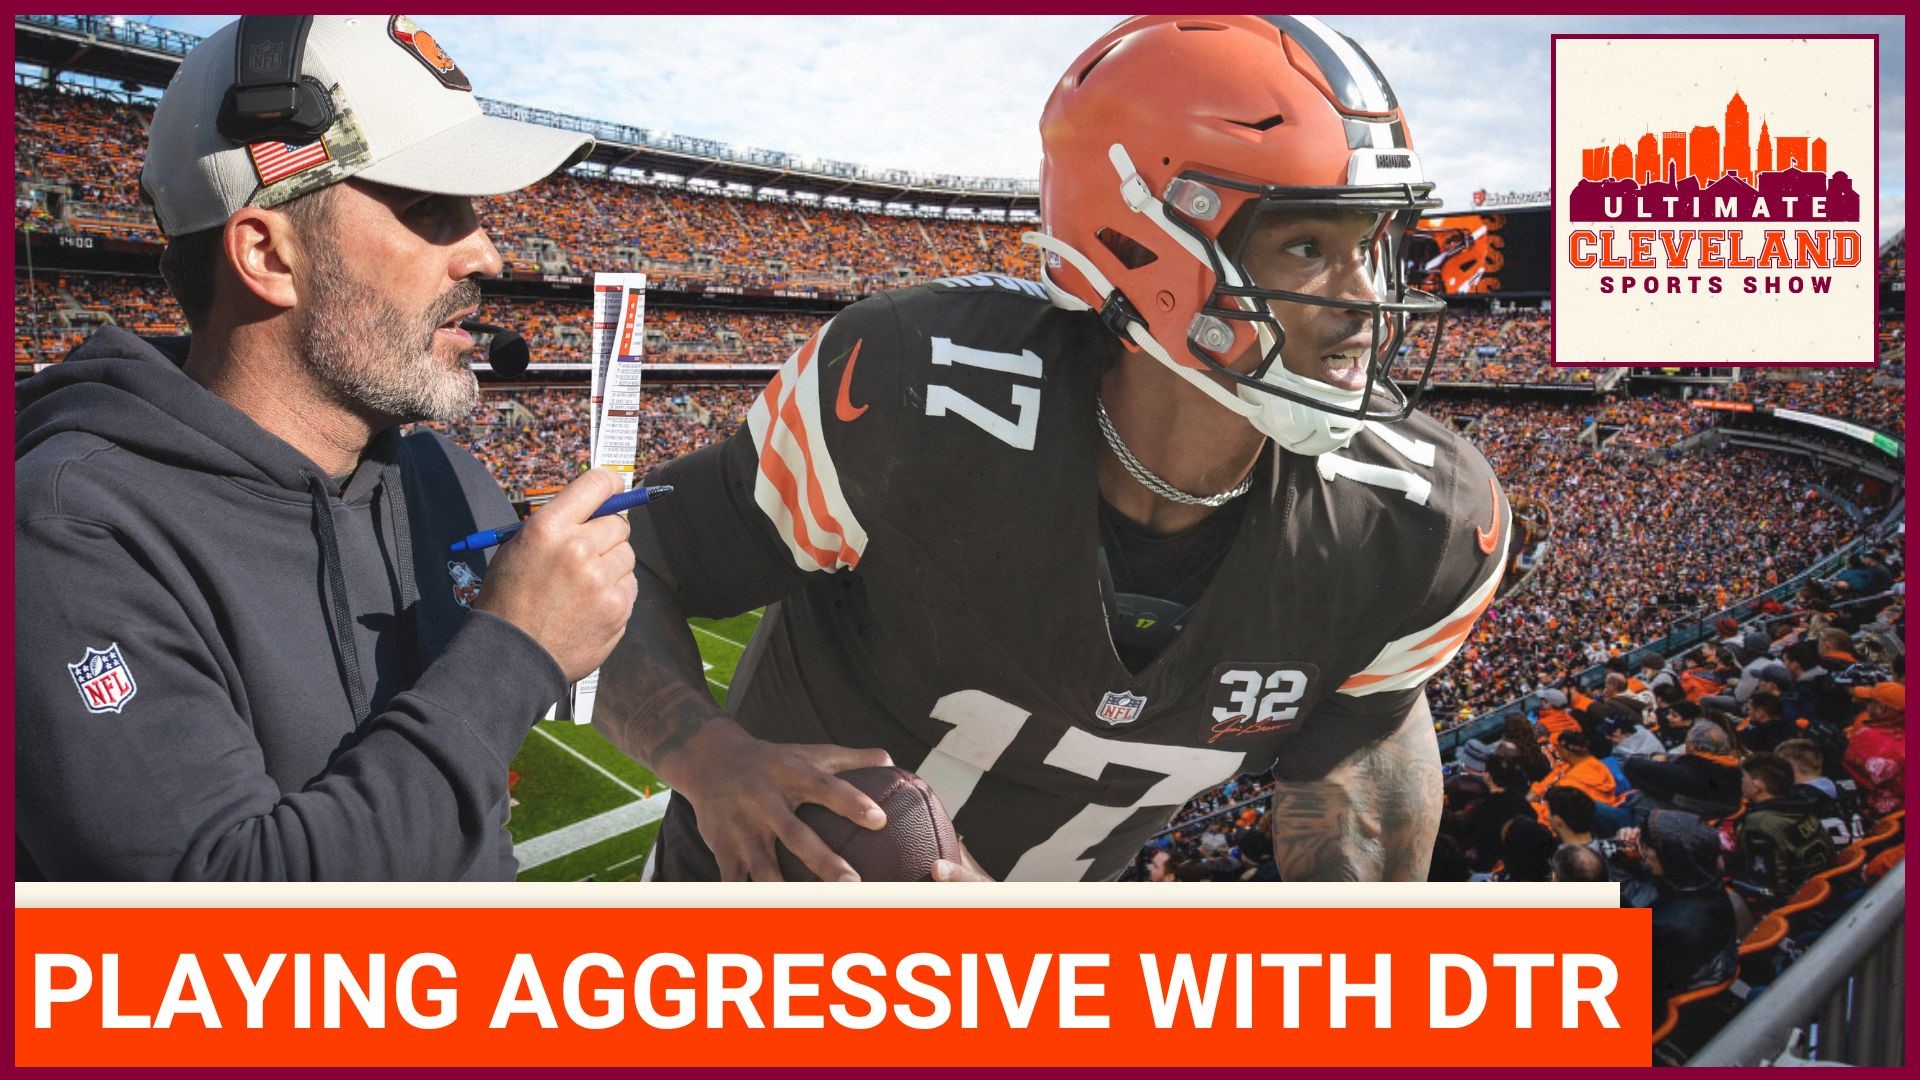 The Cleveland Browns were able to beat the Pittsburgh Steelers with a conservative game plan for DTR in his first real start, but will that work again against the De